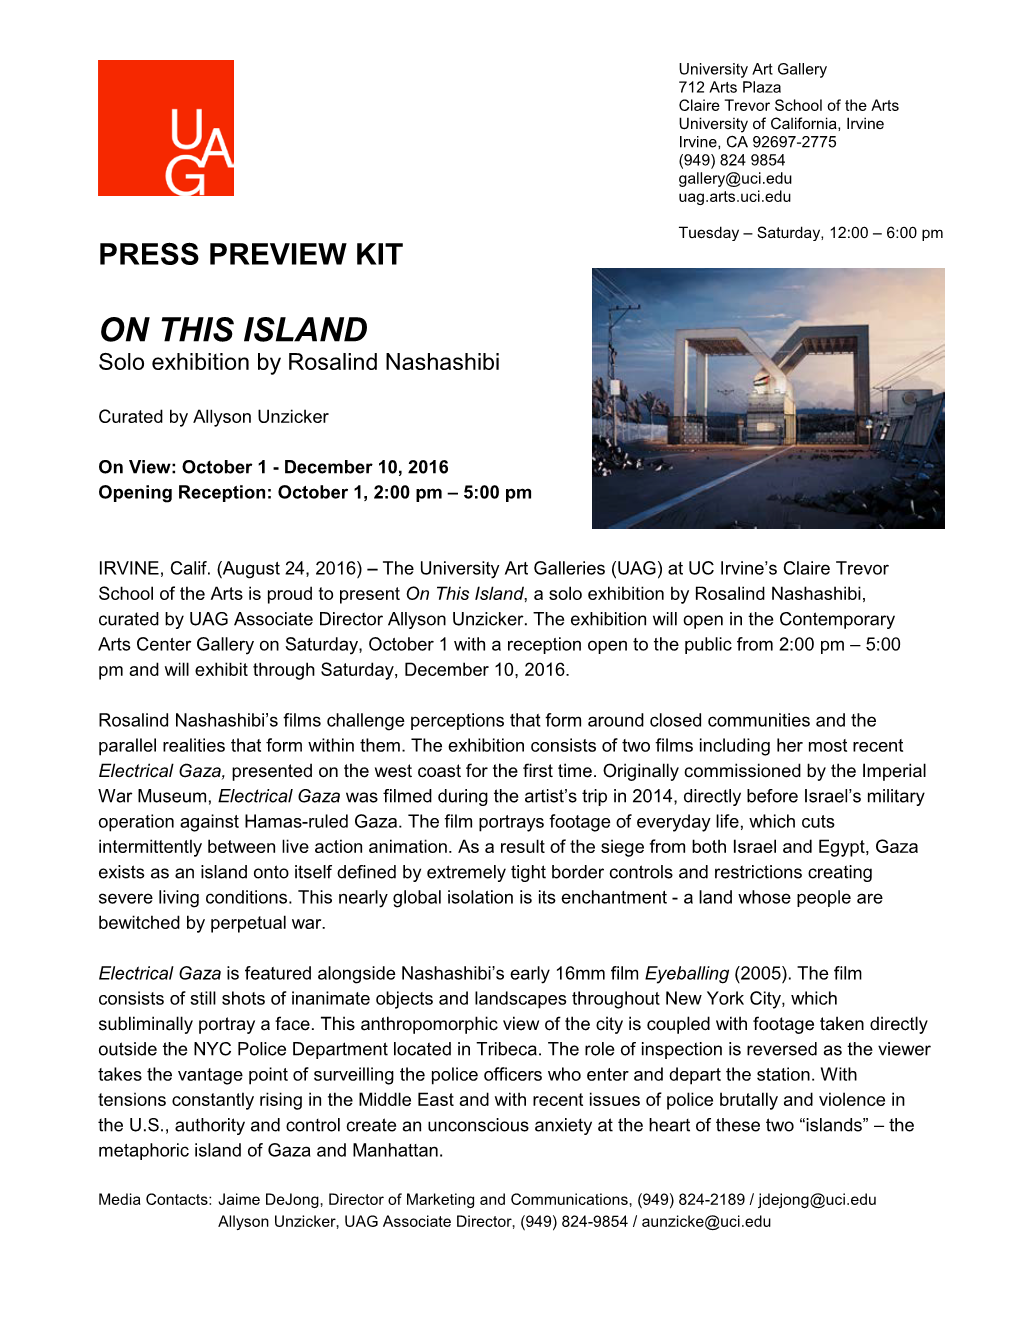 Press Preview Kit on This Island